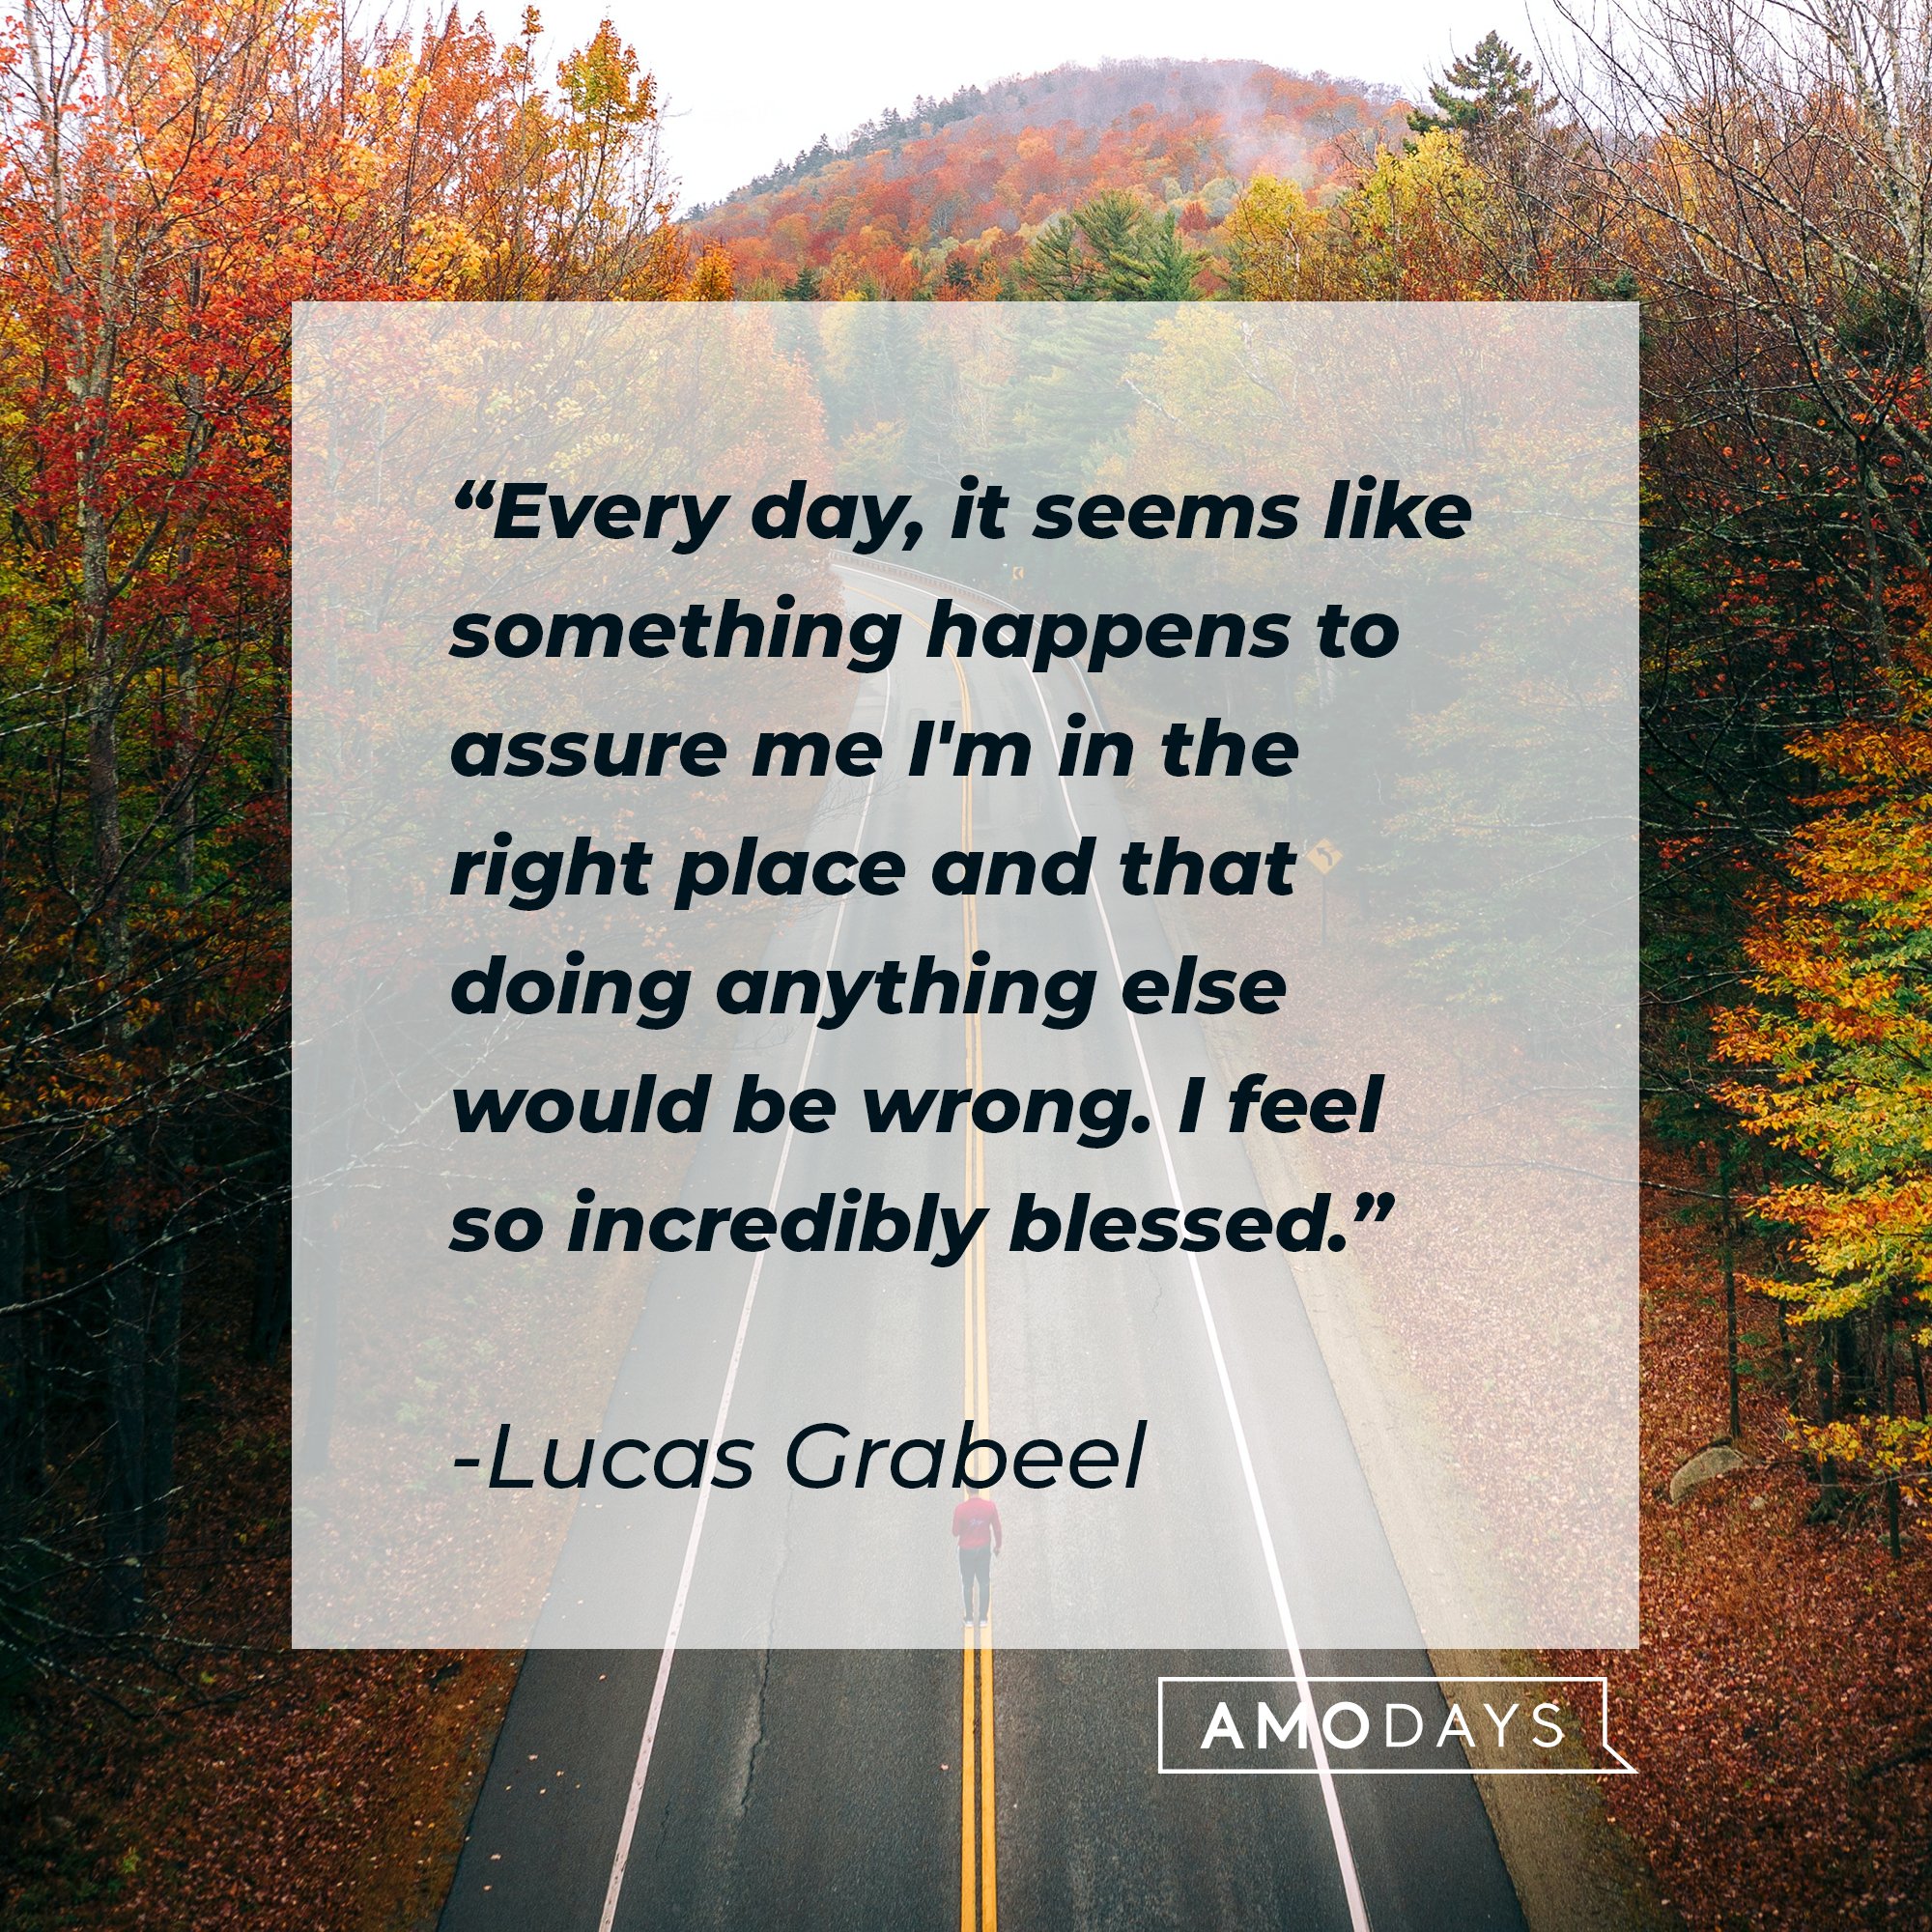 Lucas Grabeel’s quote: "Every day, it seems like something happens to assure me I'm in the right place and that doing anything else would be wrong. I feel so incredibly blessed." | Image: AmoDays